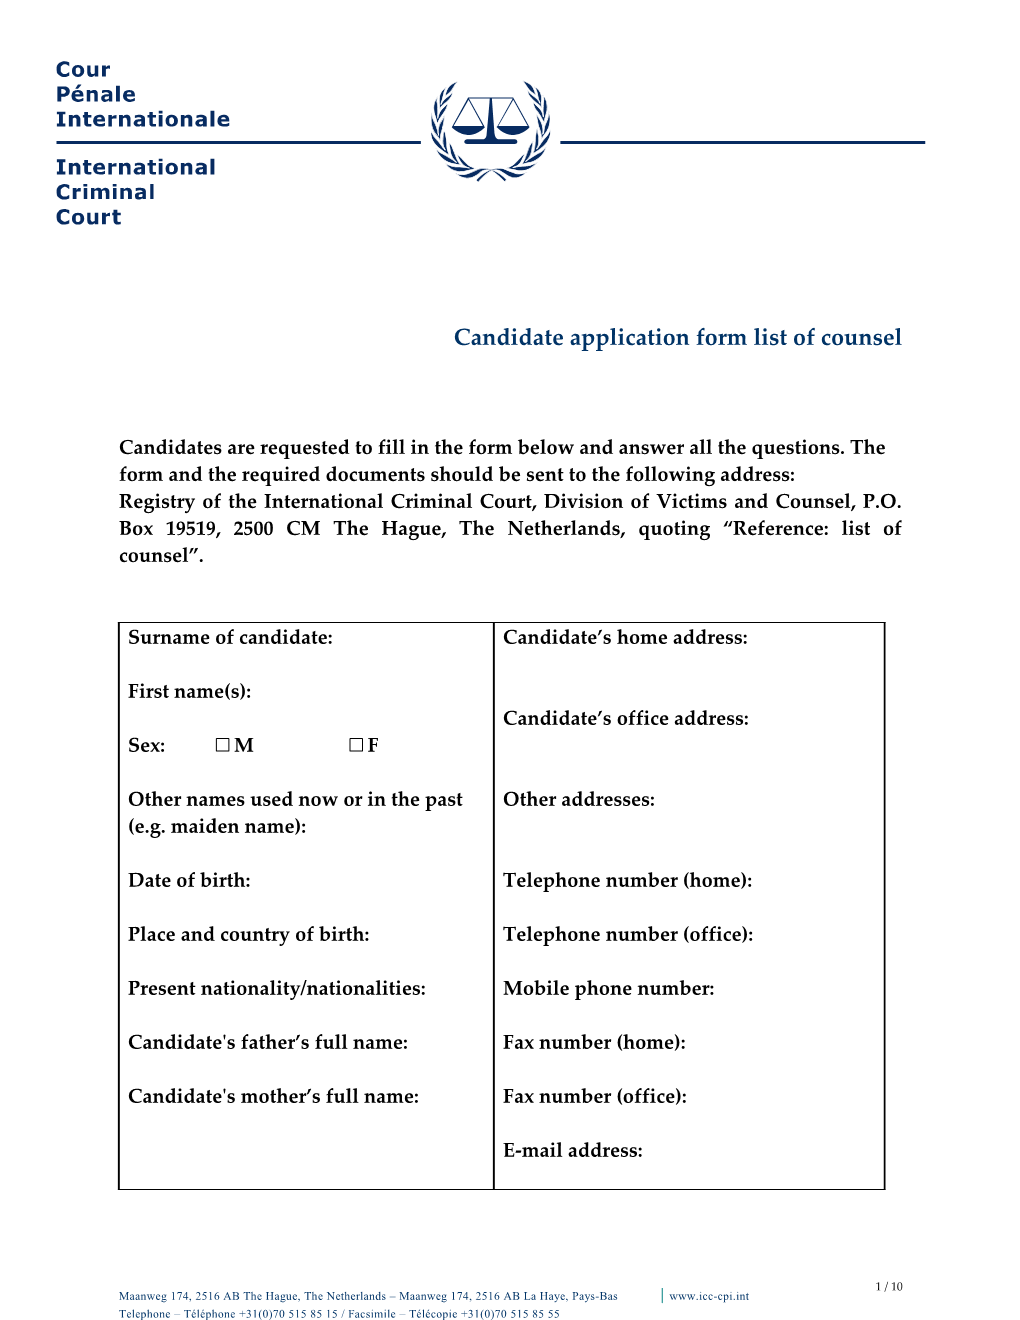 Candidate Application Form List of Counsel